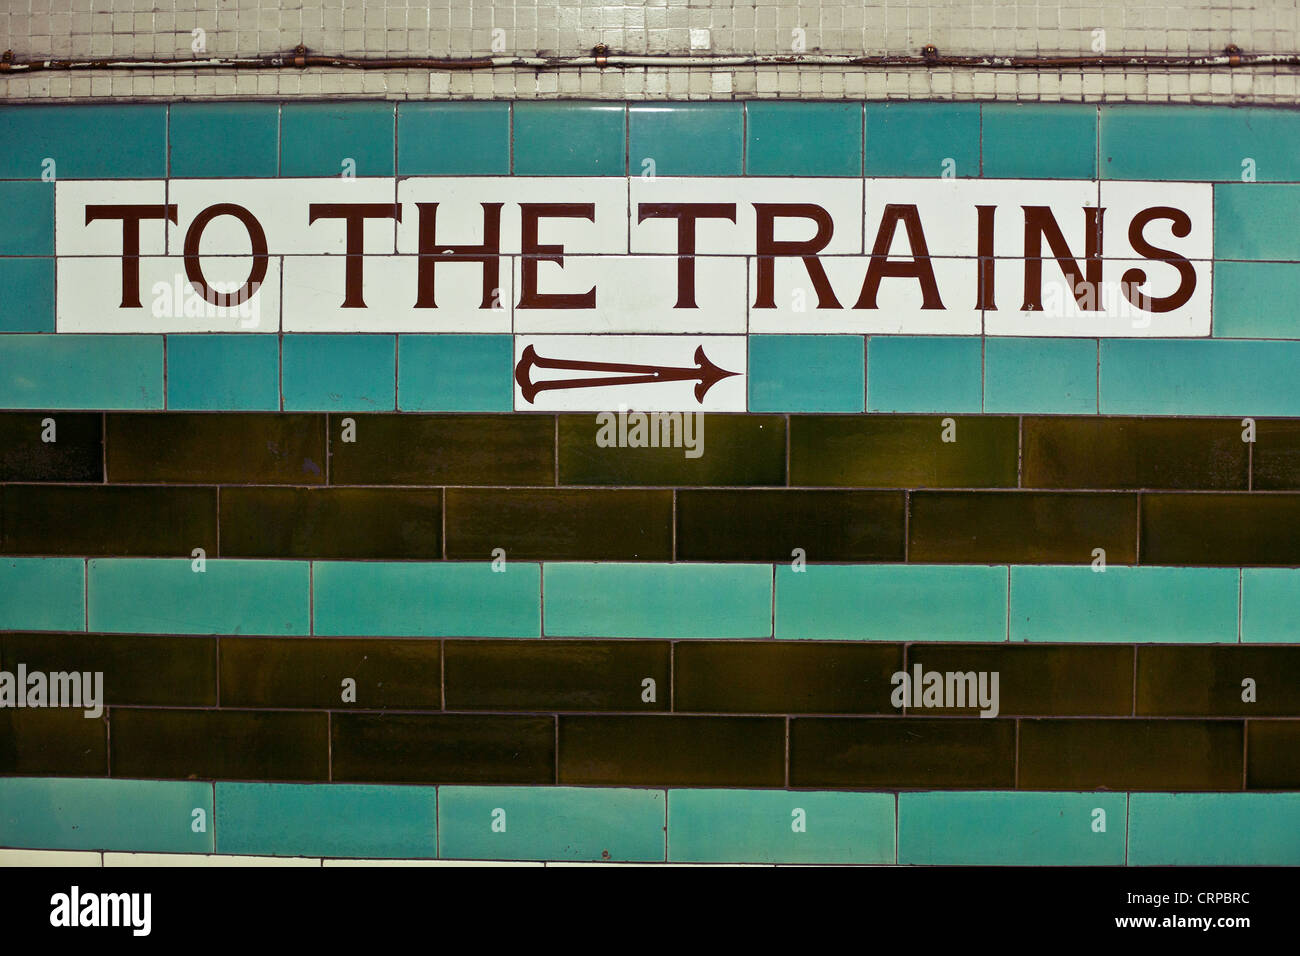 'To the trains' sign on a tiled wall in an underground station, London, England, UK. Stock Photo